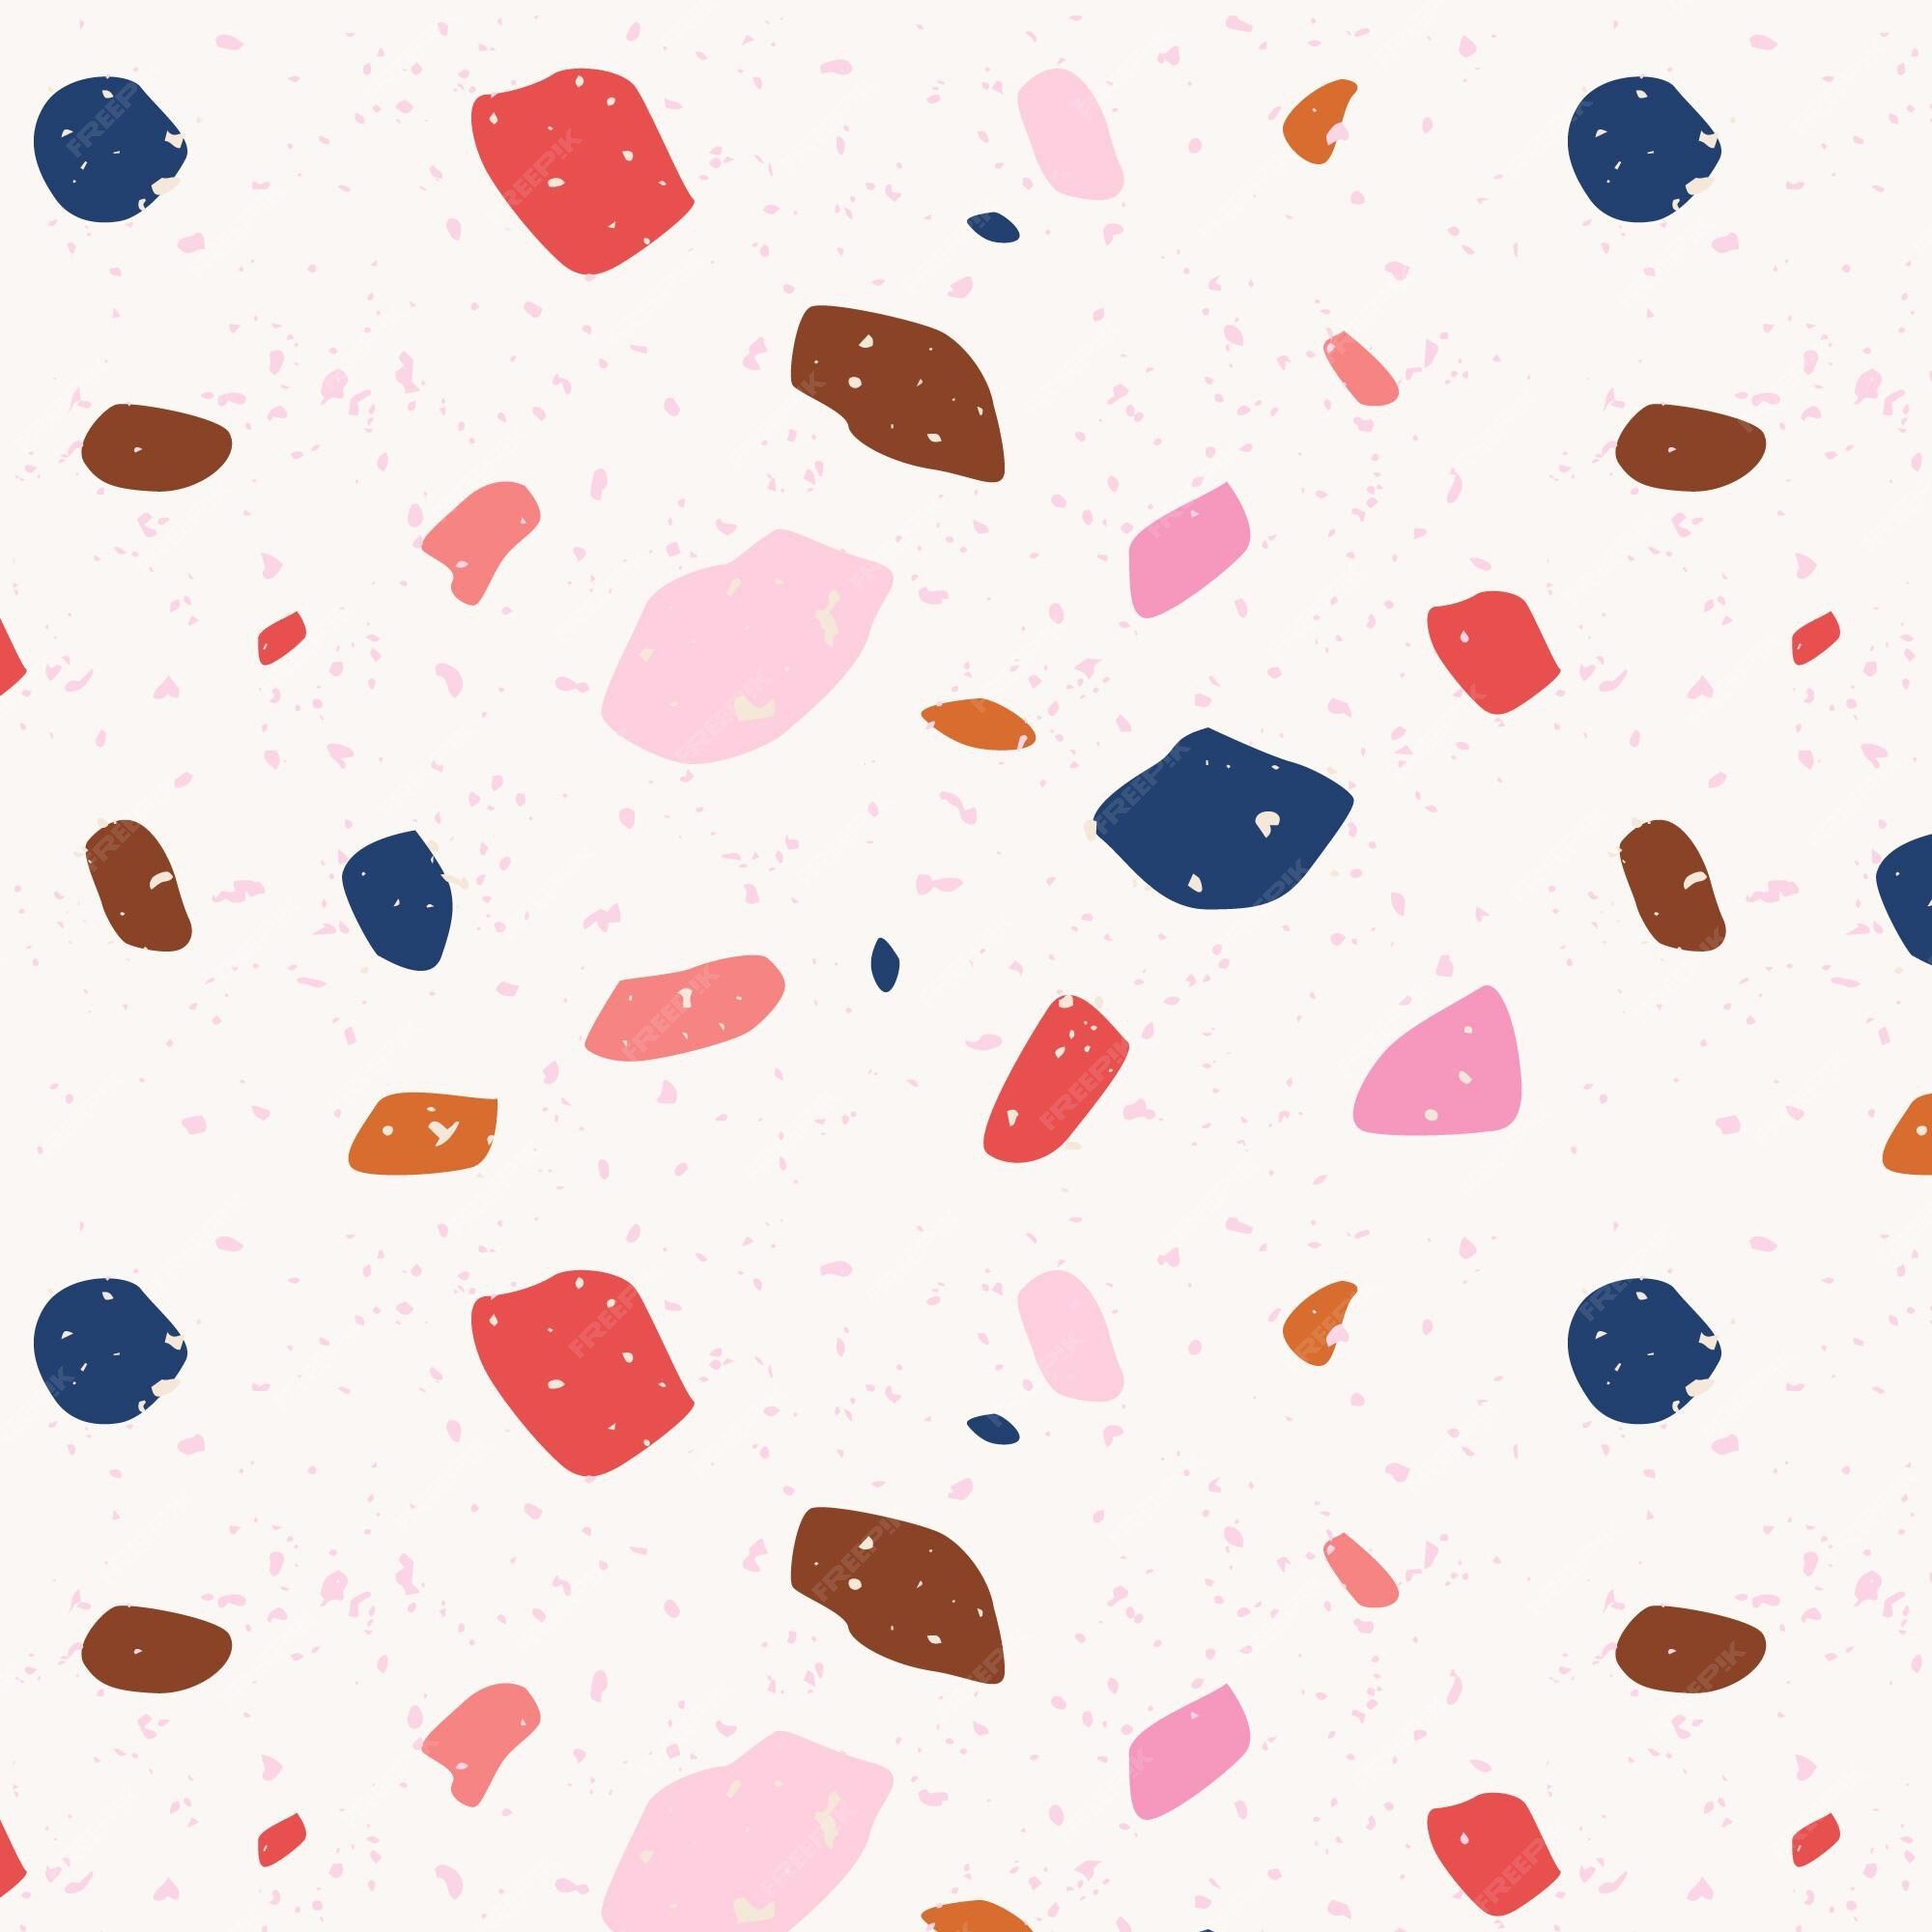 A watercolor pattern with irregular shapes in pink, blue, and navy. - Terrazzo